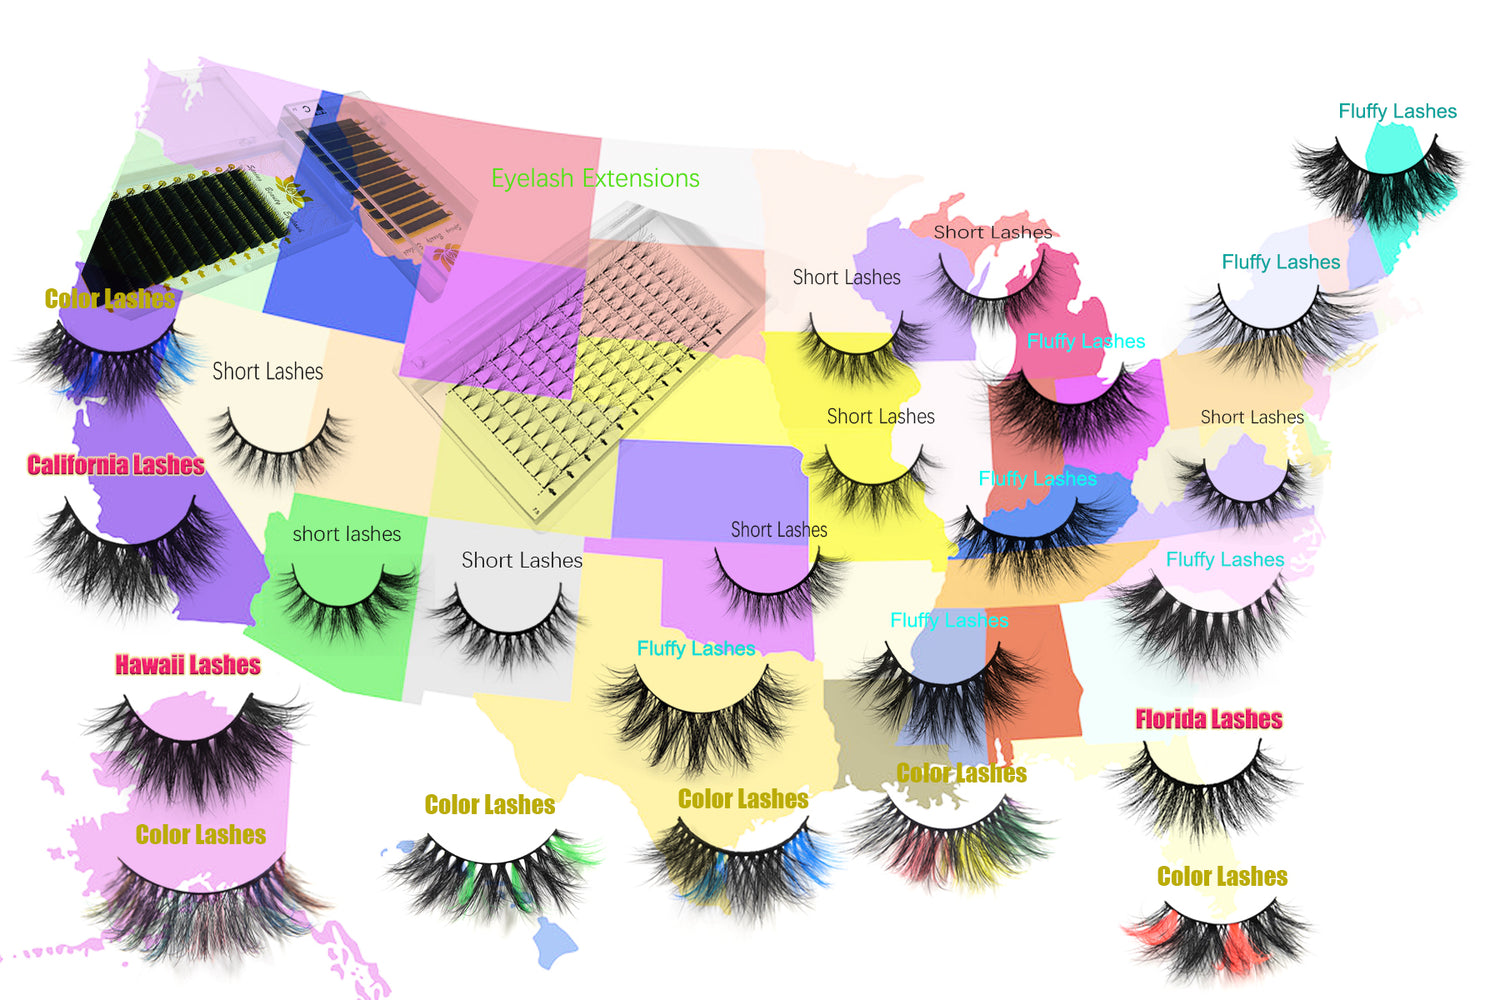 what types of false eyelashes are popular in different continent of USA?